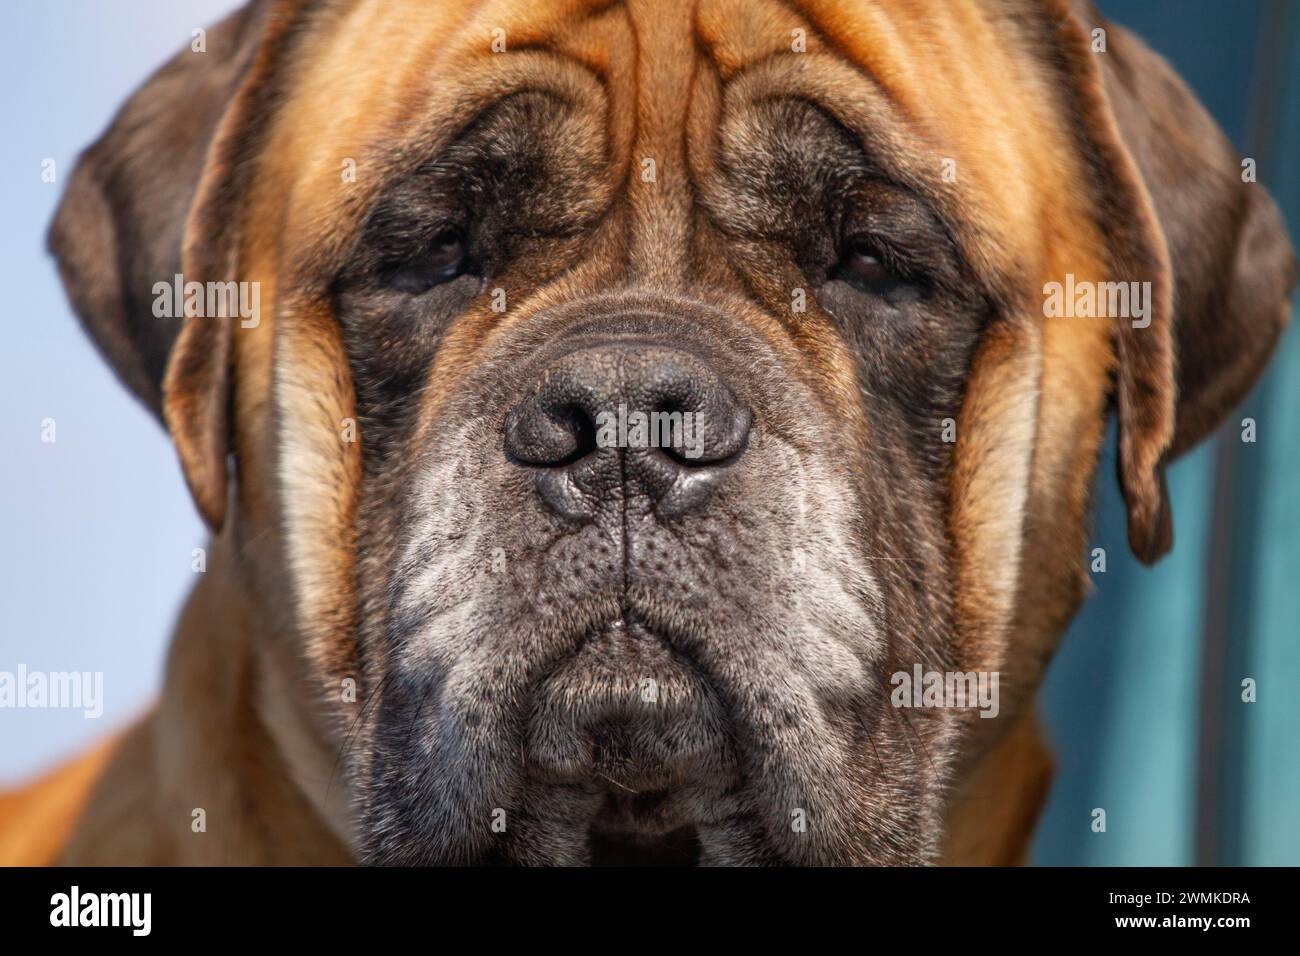 Close-up portrait of a dog's head Stock Photo